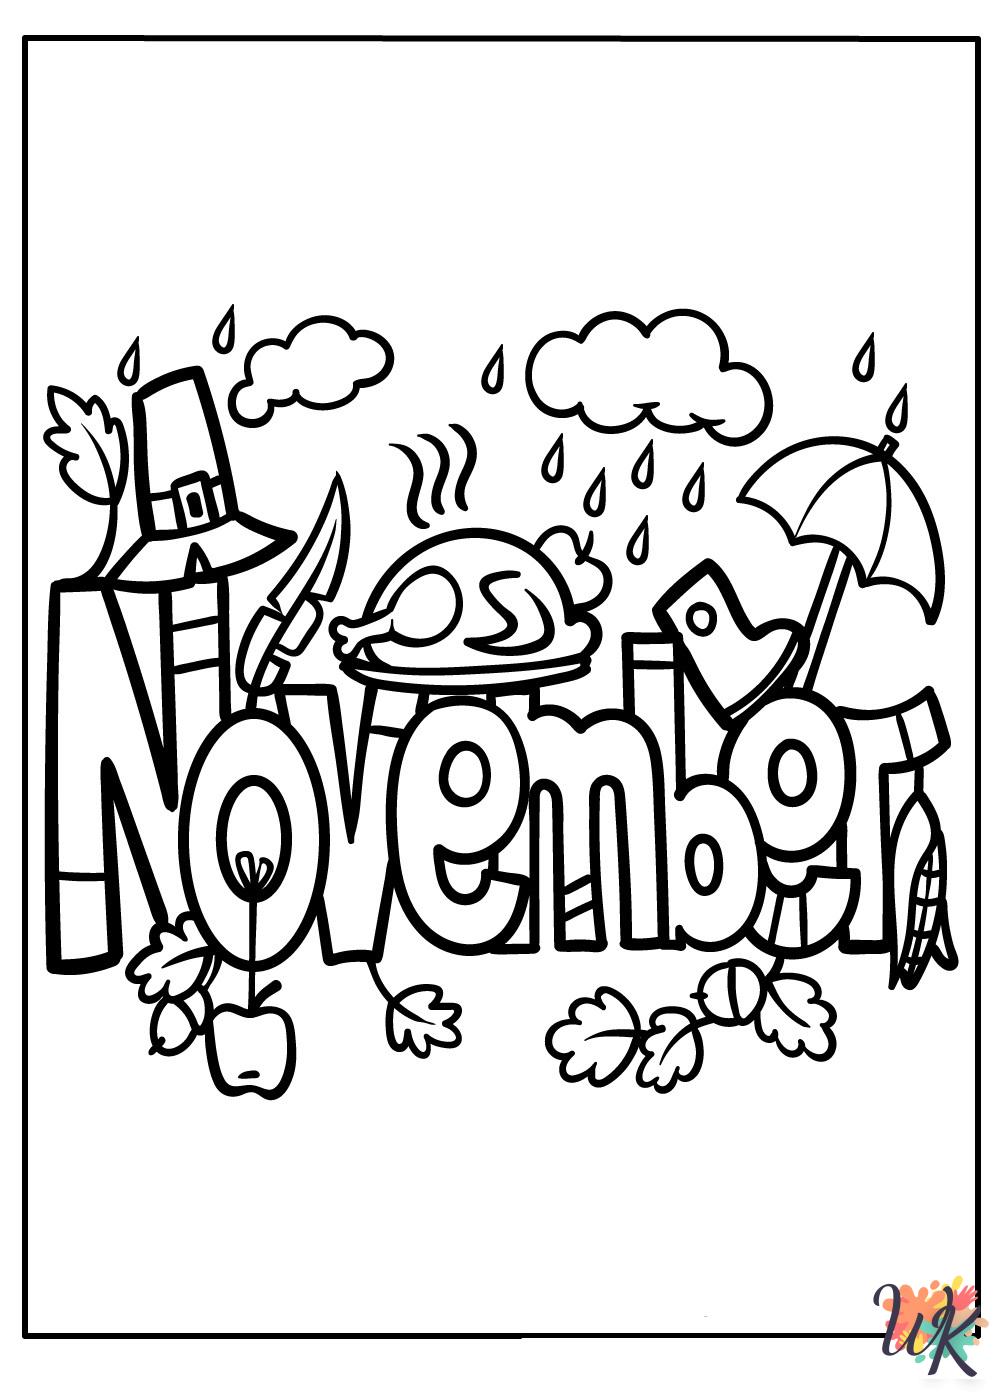 November coloring pages for preschoolers